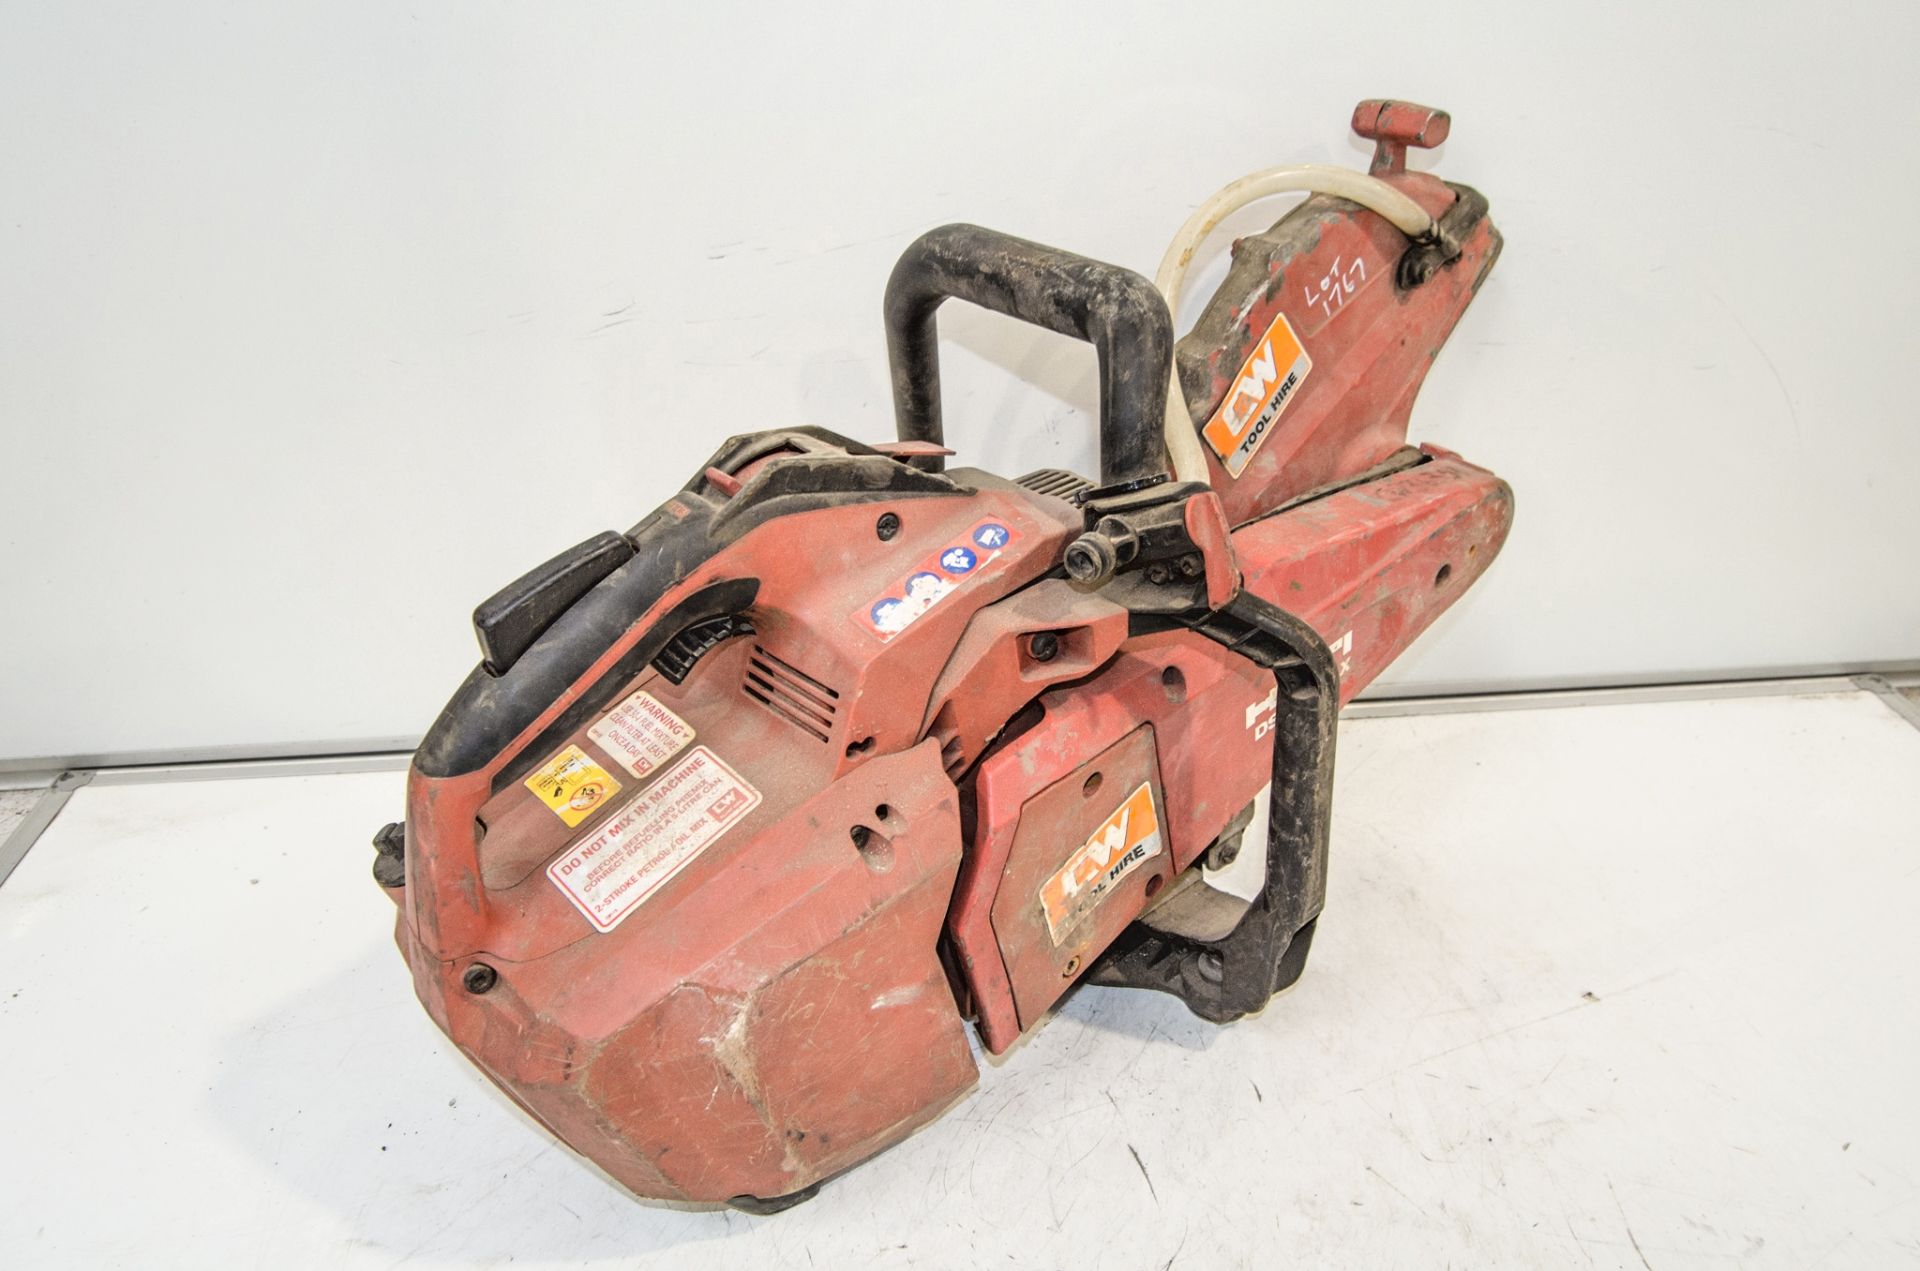 Hilti DSH-600-X petrol driven cut off saw ** Pull cord missing ** CW36351 - Image 2 of 2